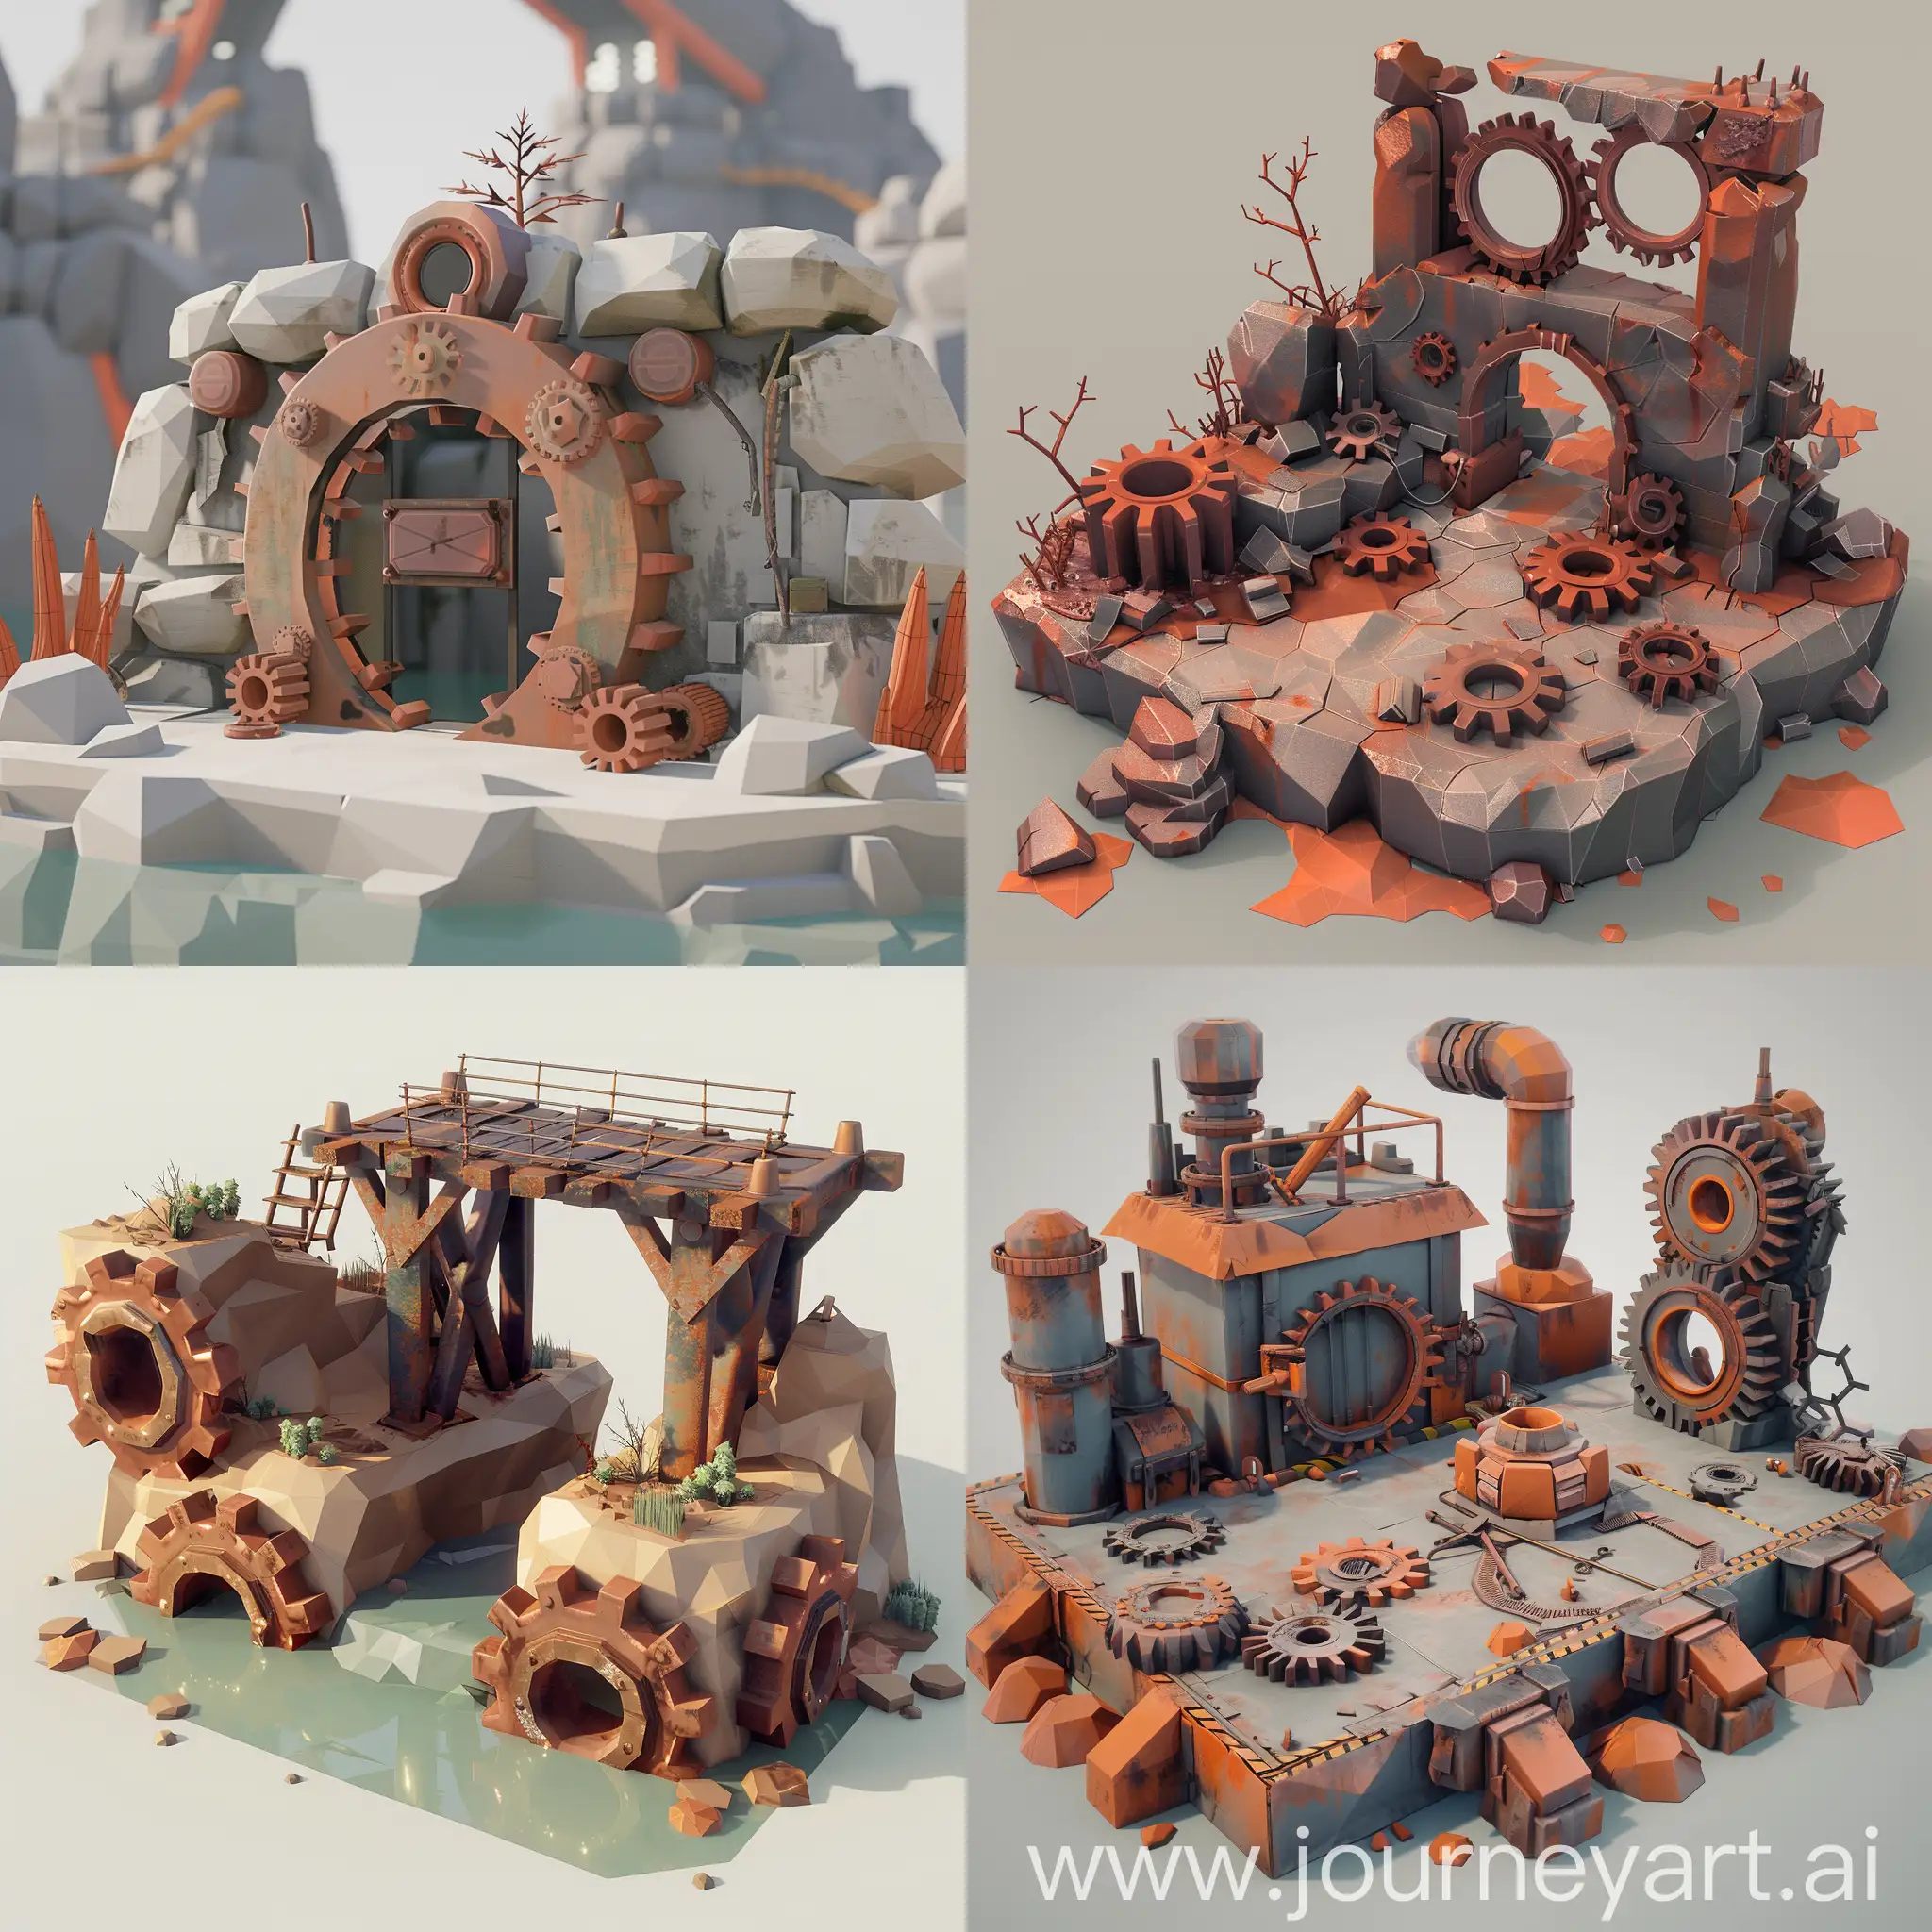 Rusty-Gear-Mechanisms-in-Low-Poly-3D-Game-Environment